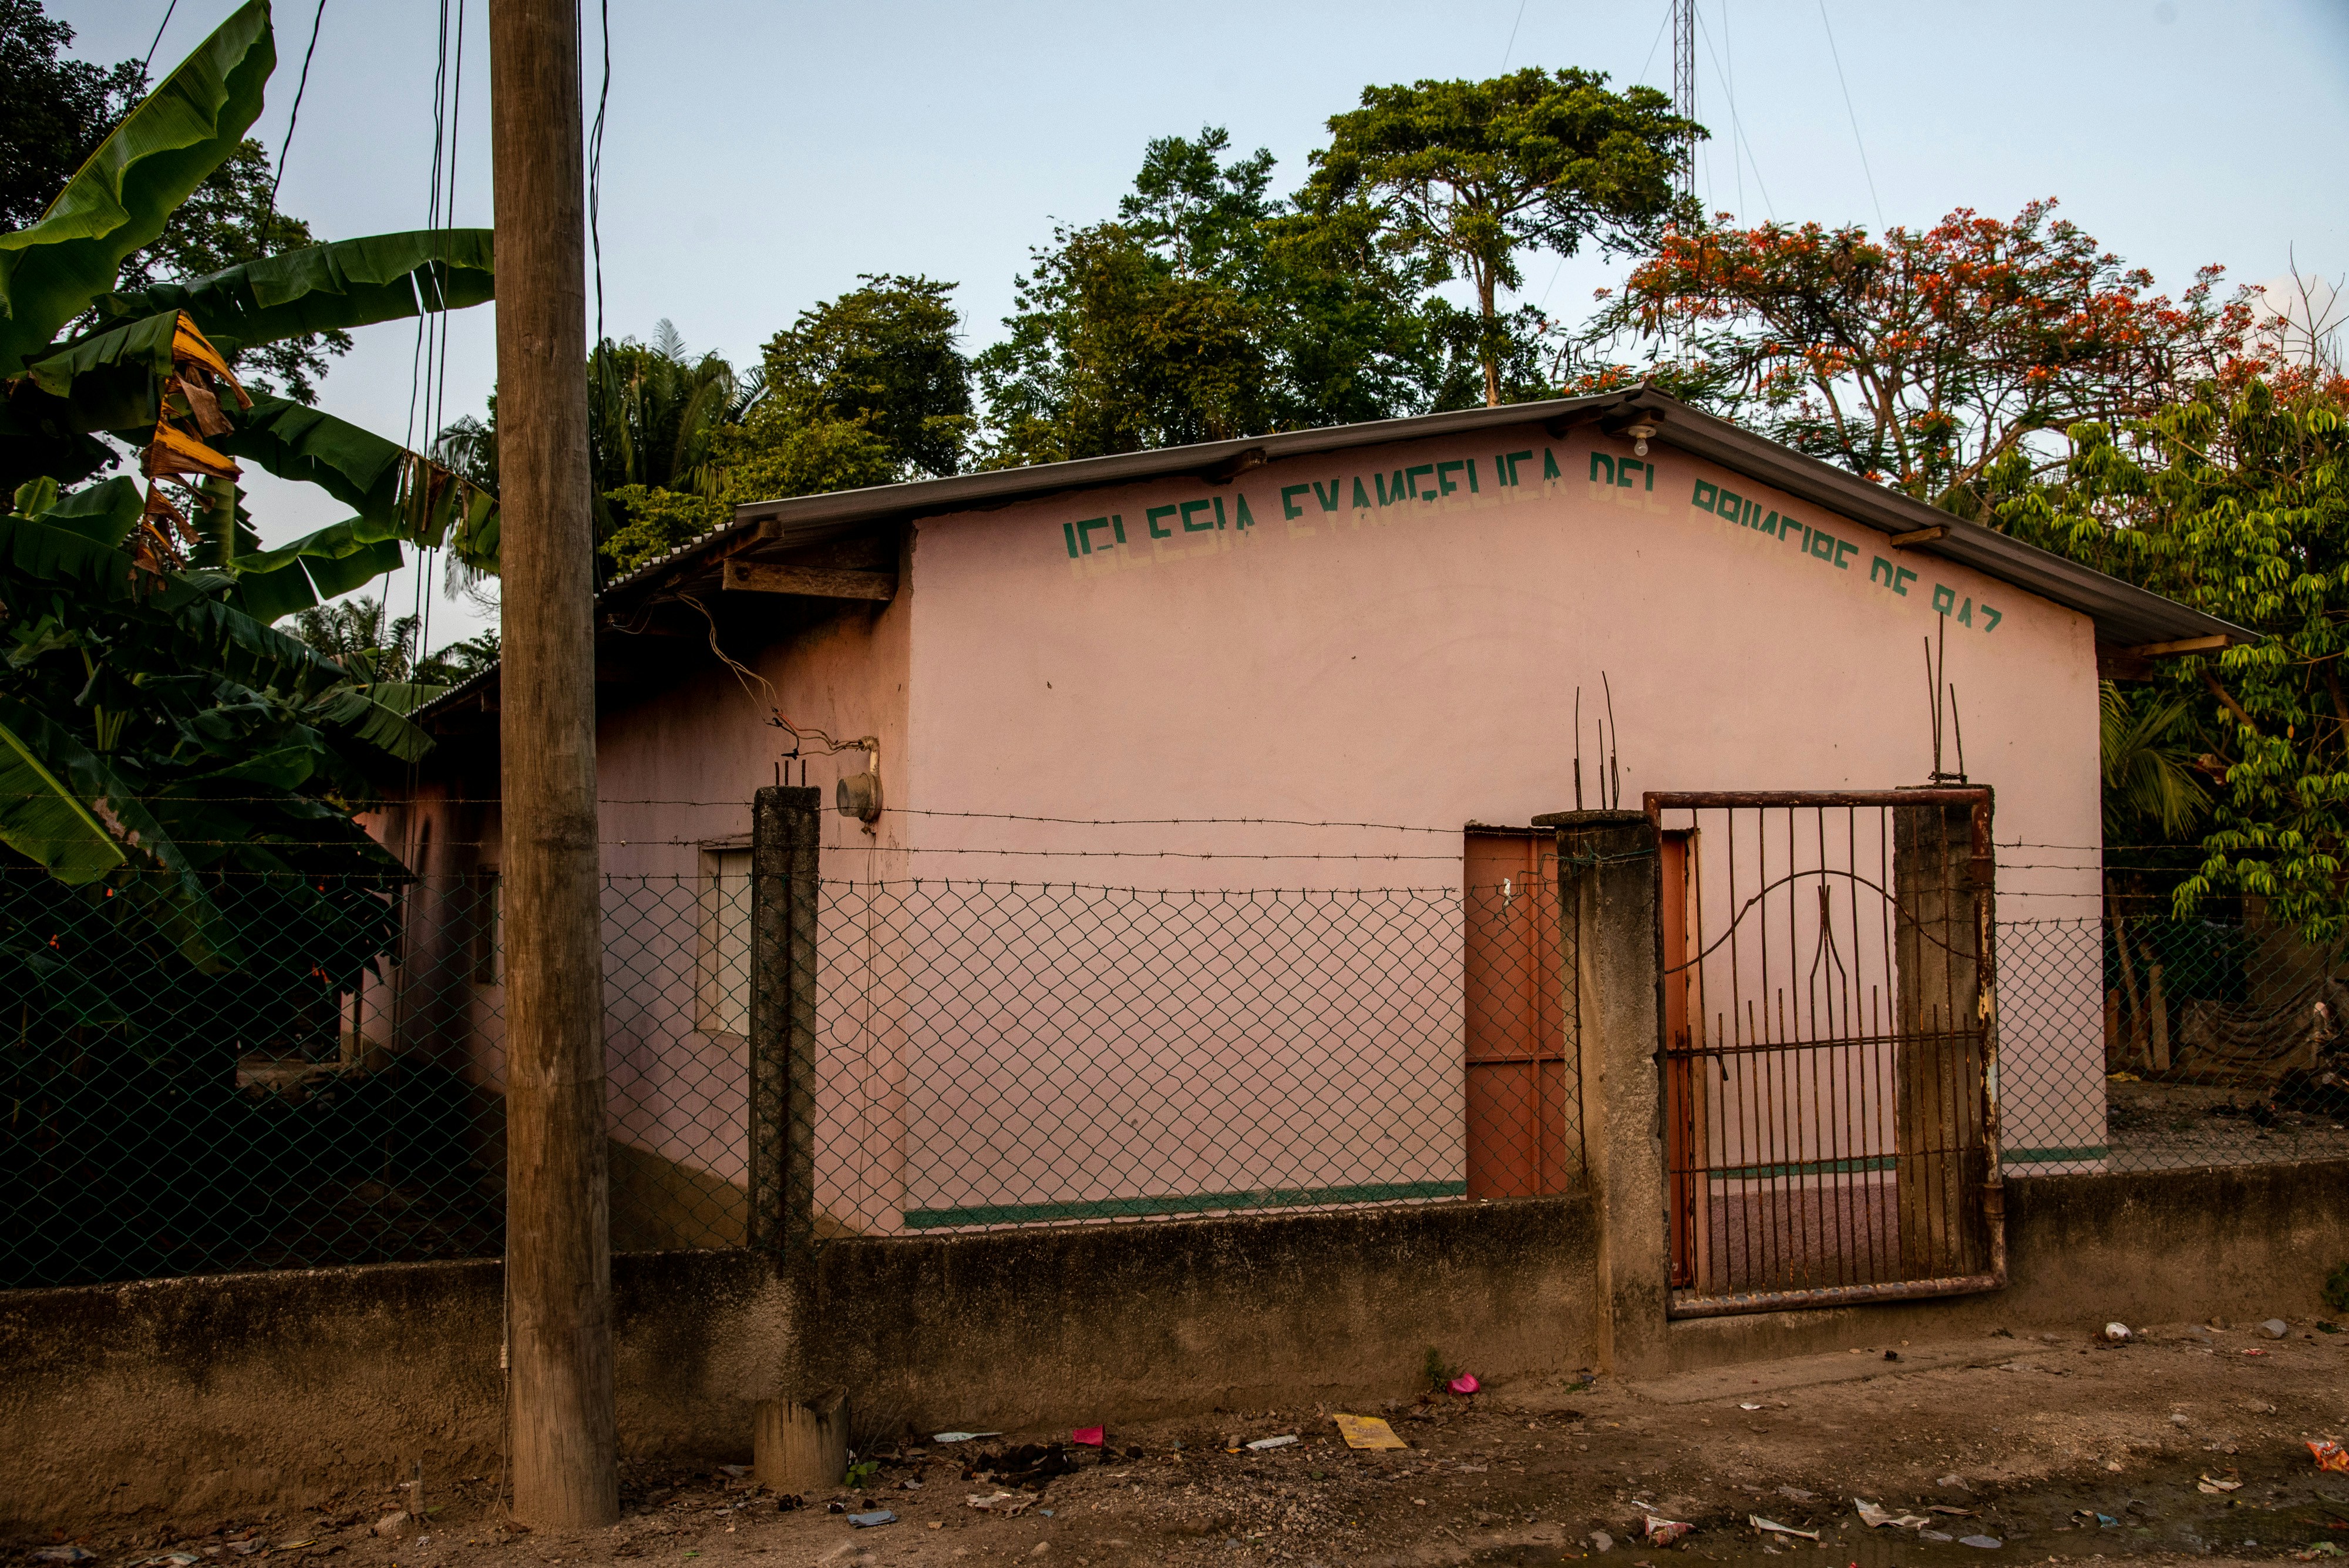 The church where Santos Torres was murdered in Panama, Honduras, on July, 21st, 2021. Seth Berry for The Intercept.